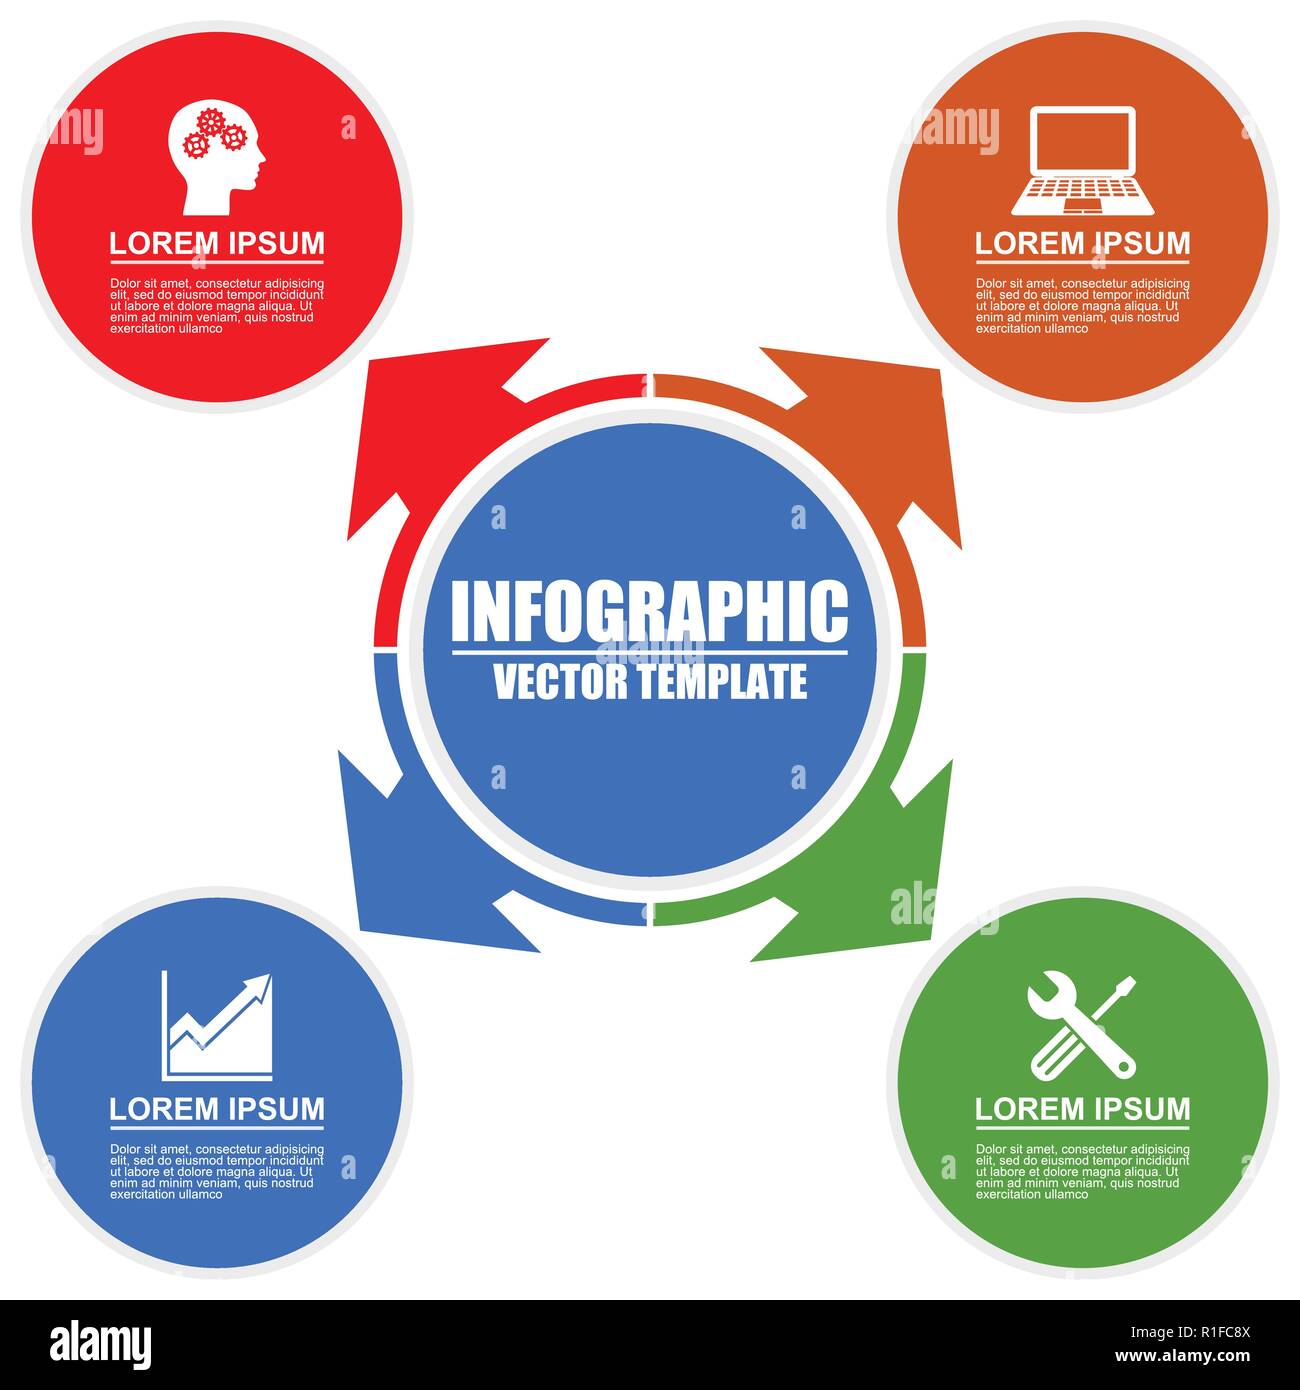 Infographic vector template education technology business service with 4 options Stock Vector